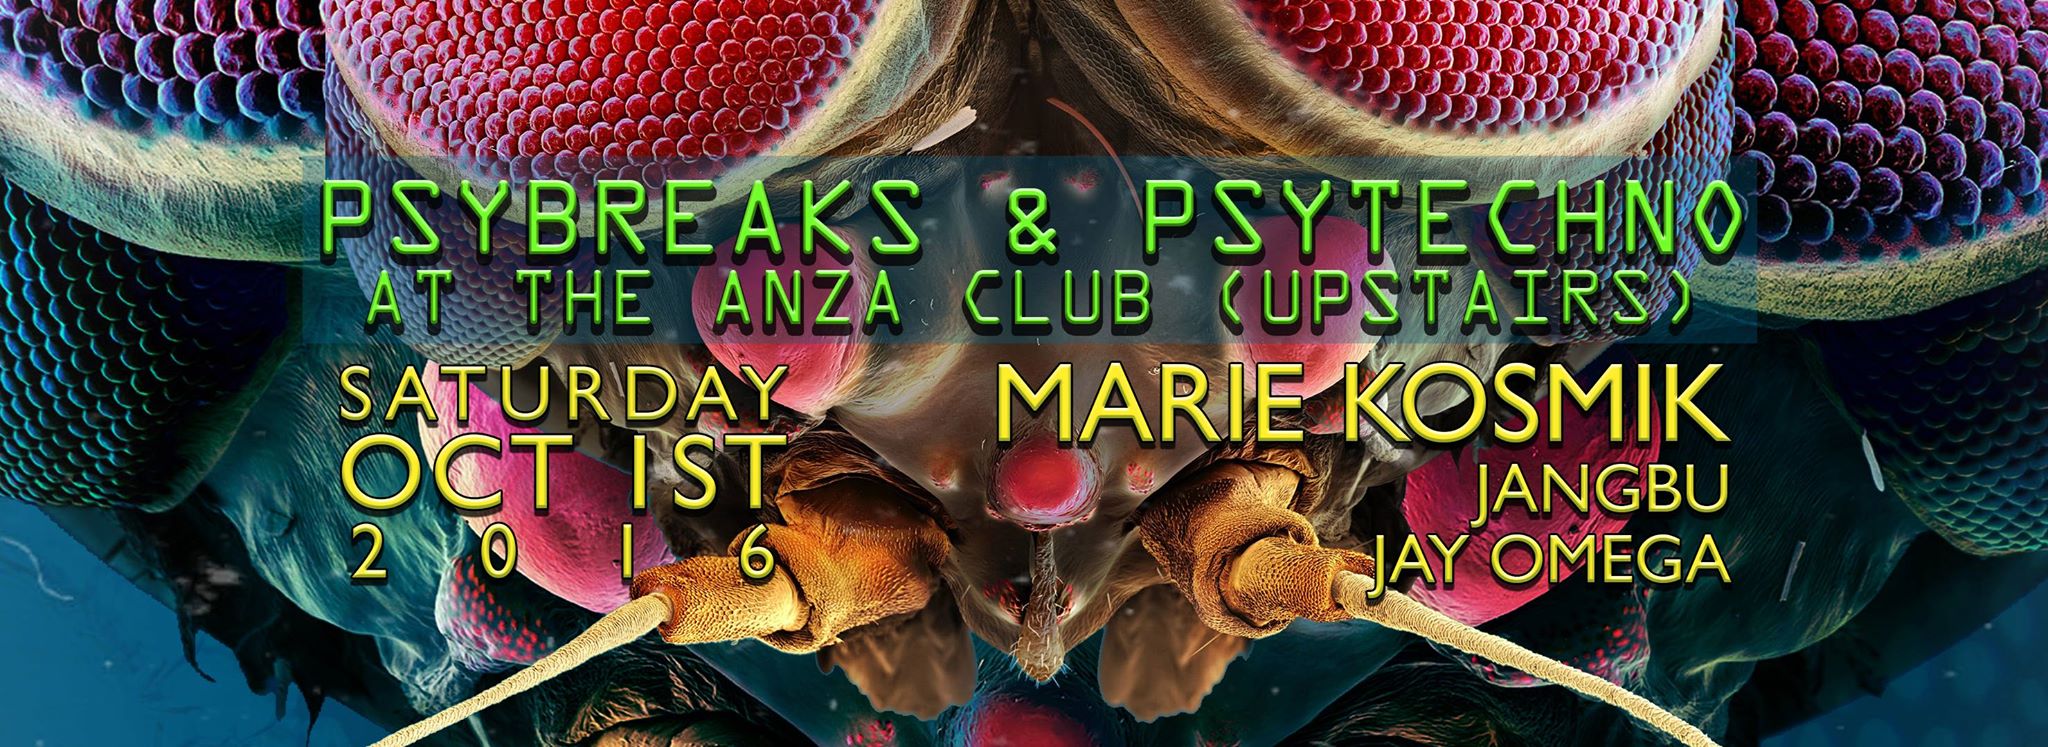 Psy Breaks and Techno at Anza Club